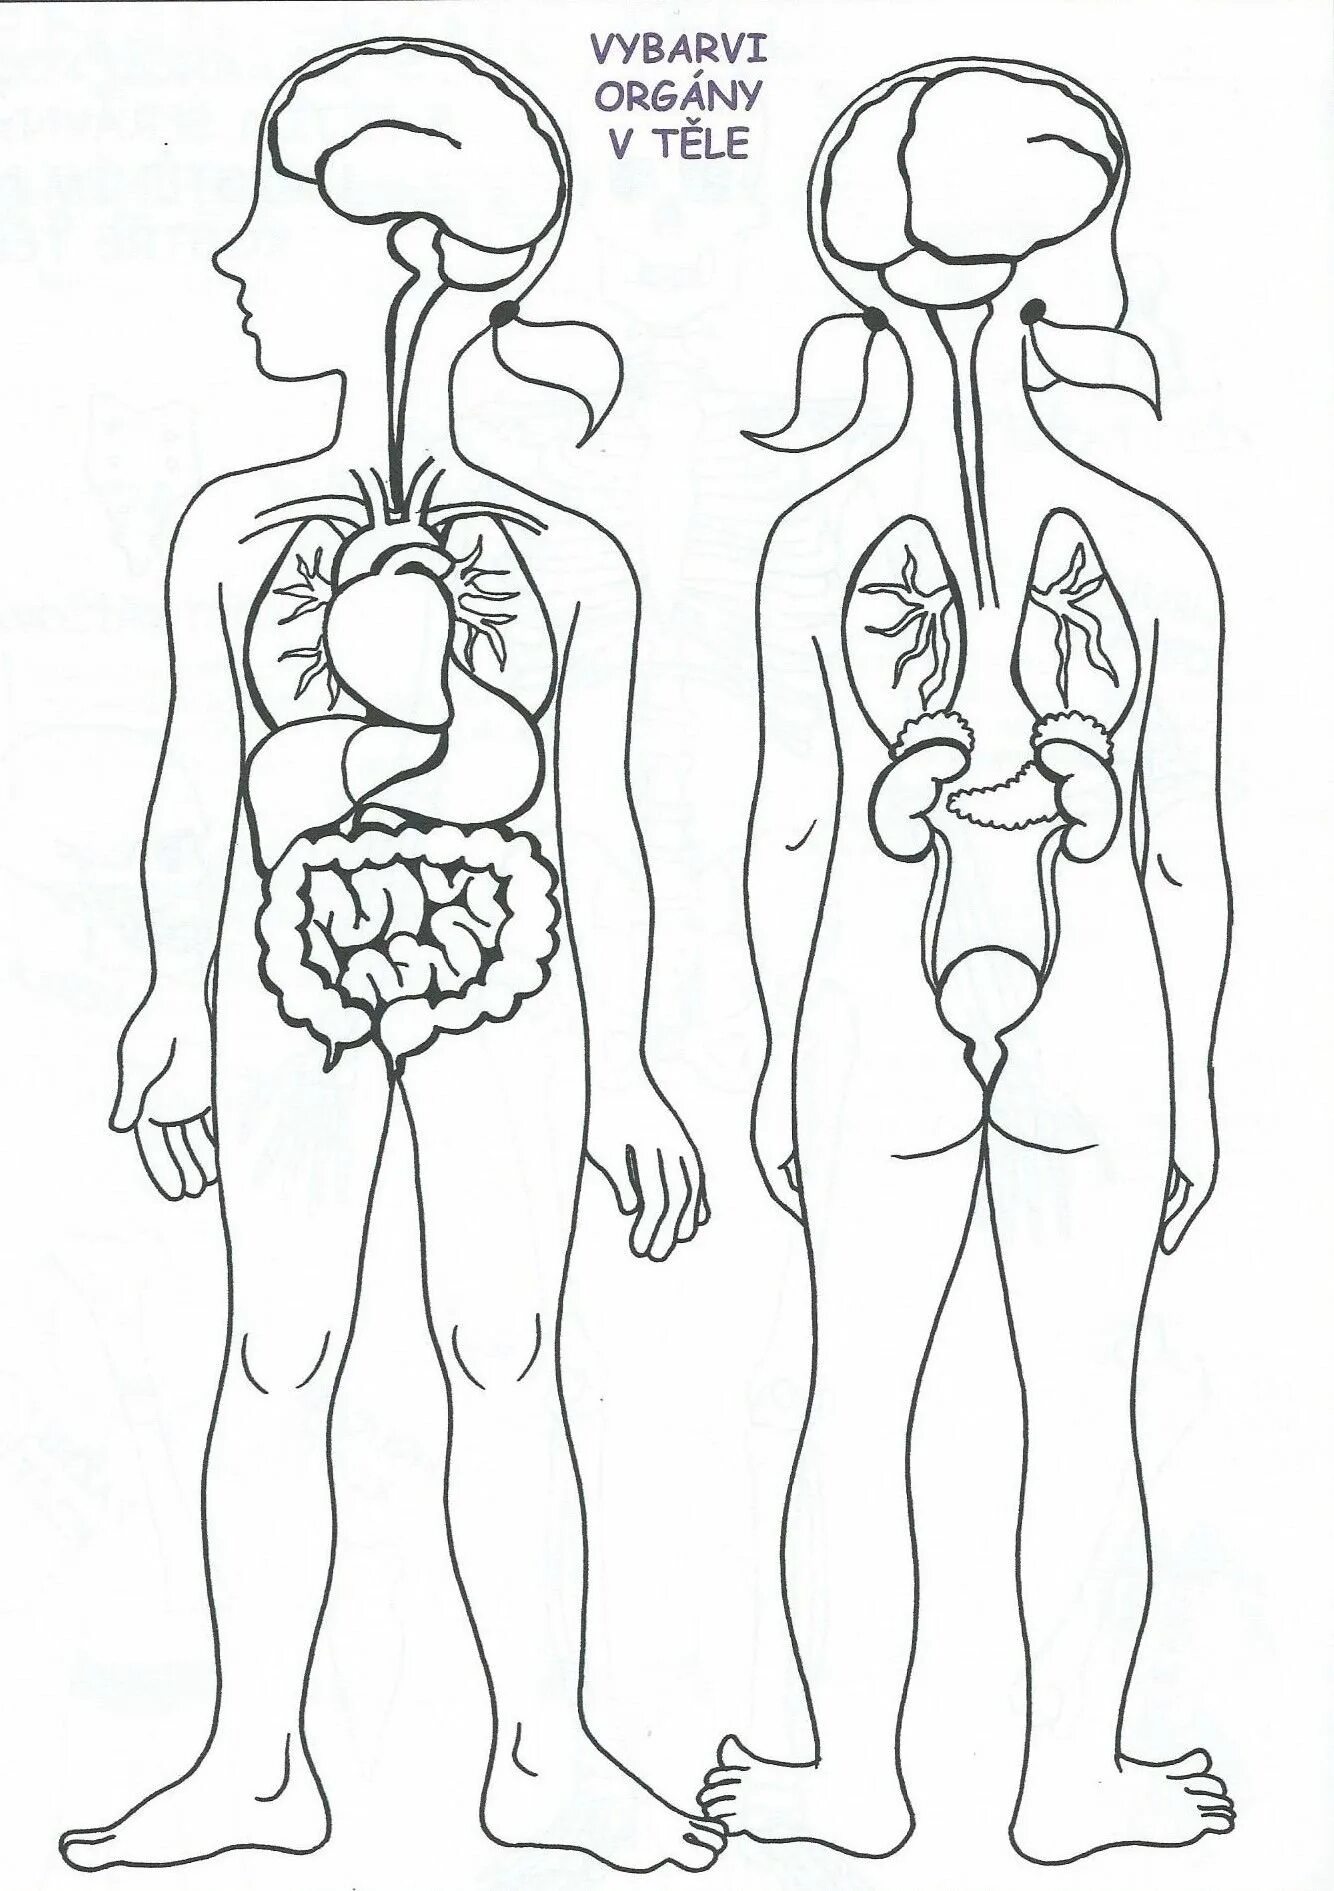 Human body with internal organs for children #19